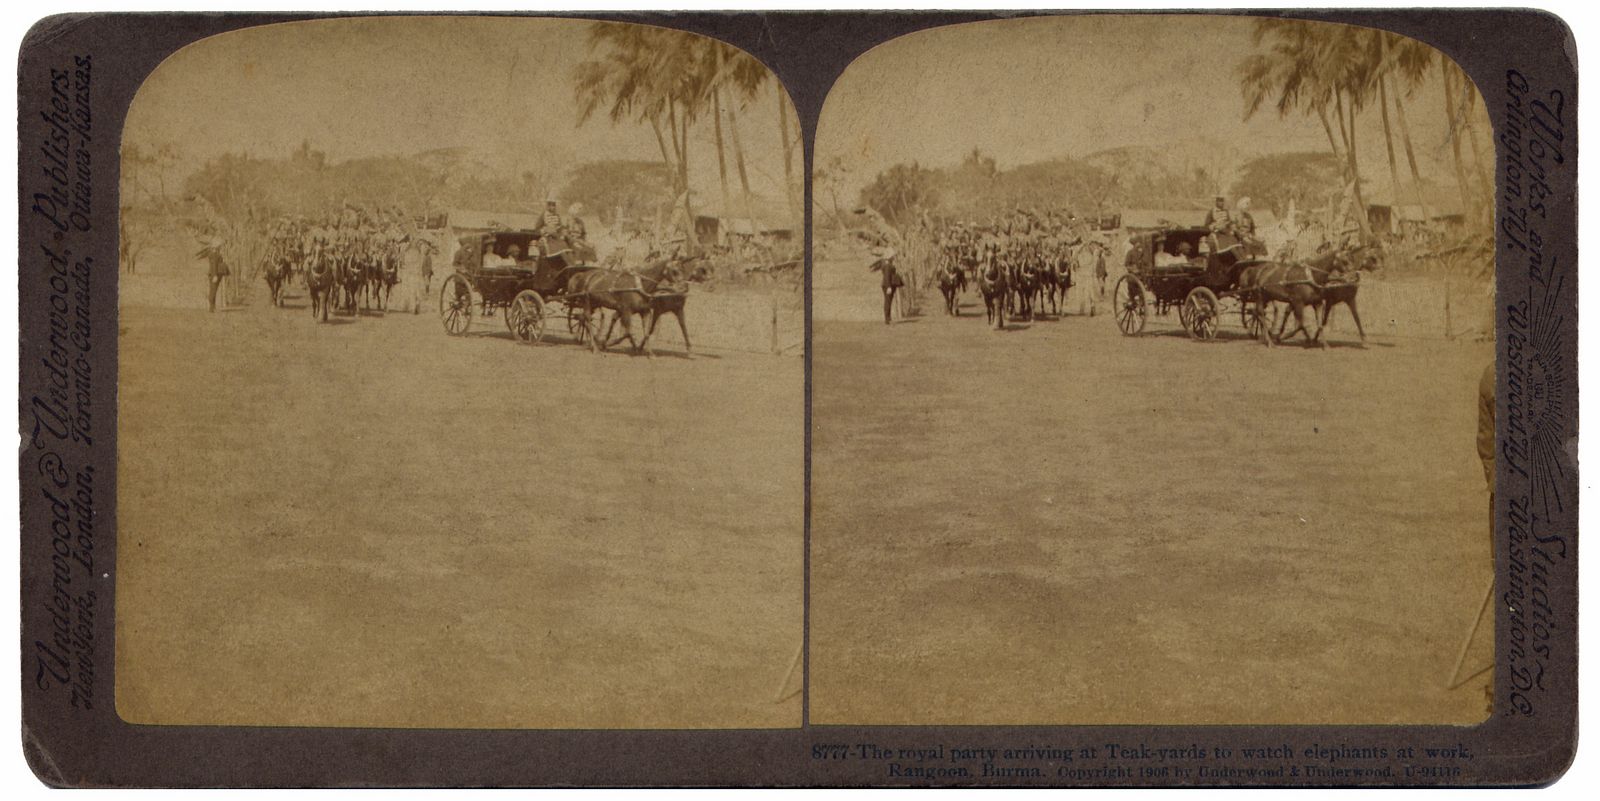 The royal party arriving at Teak-yards to watch elephants at work, Rangoon Burma